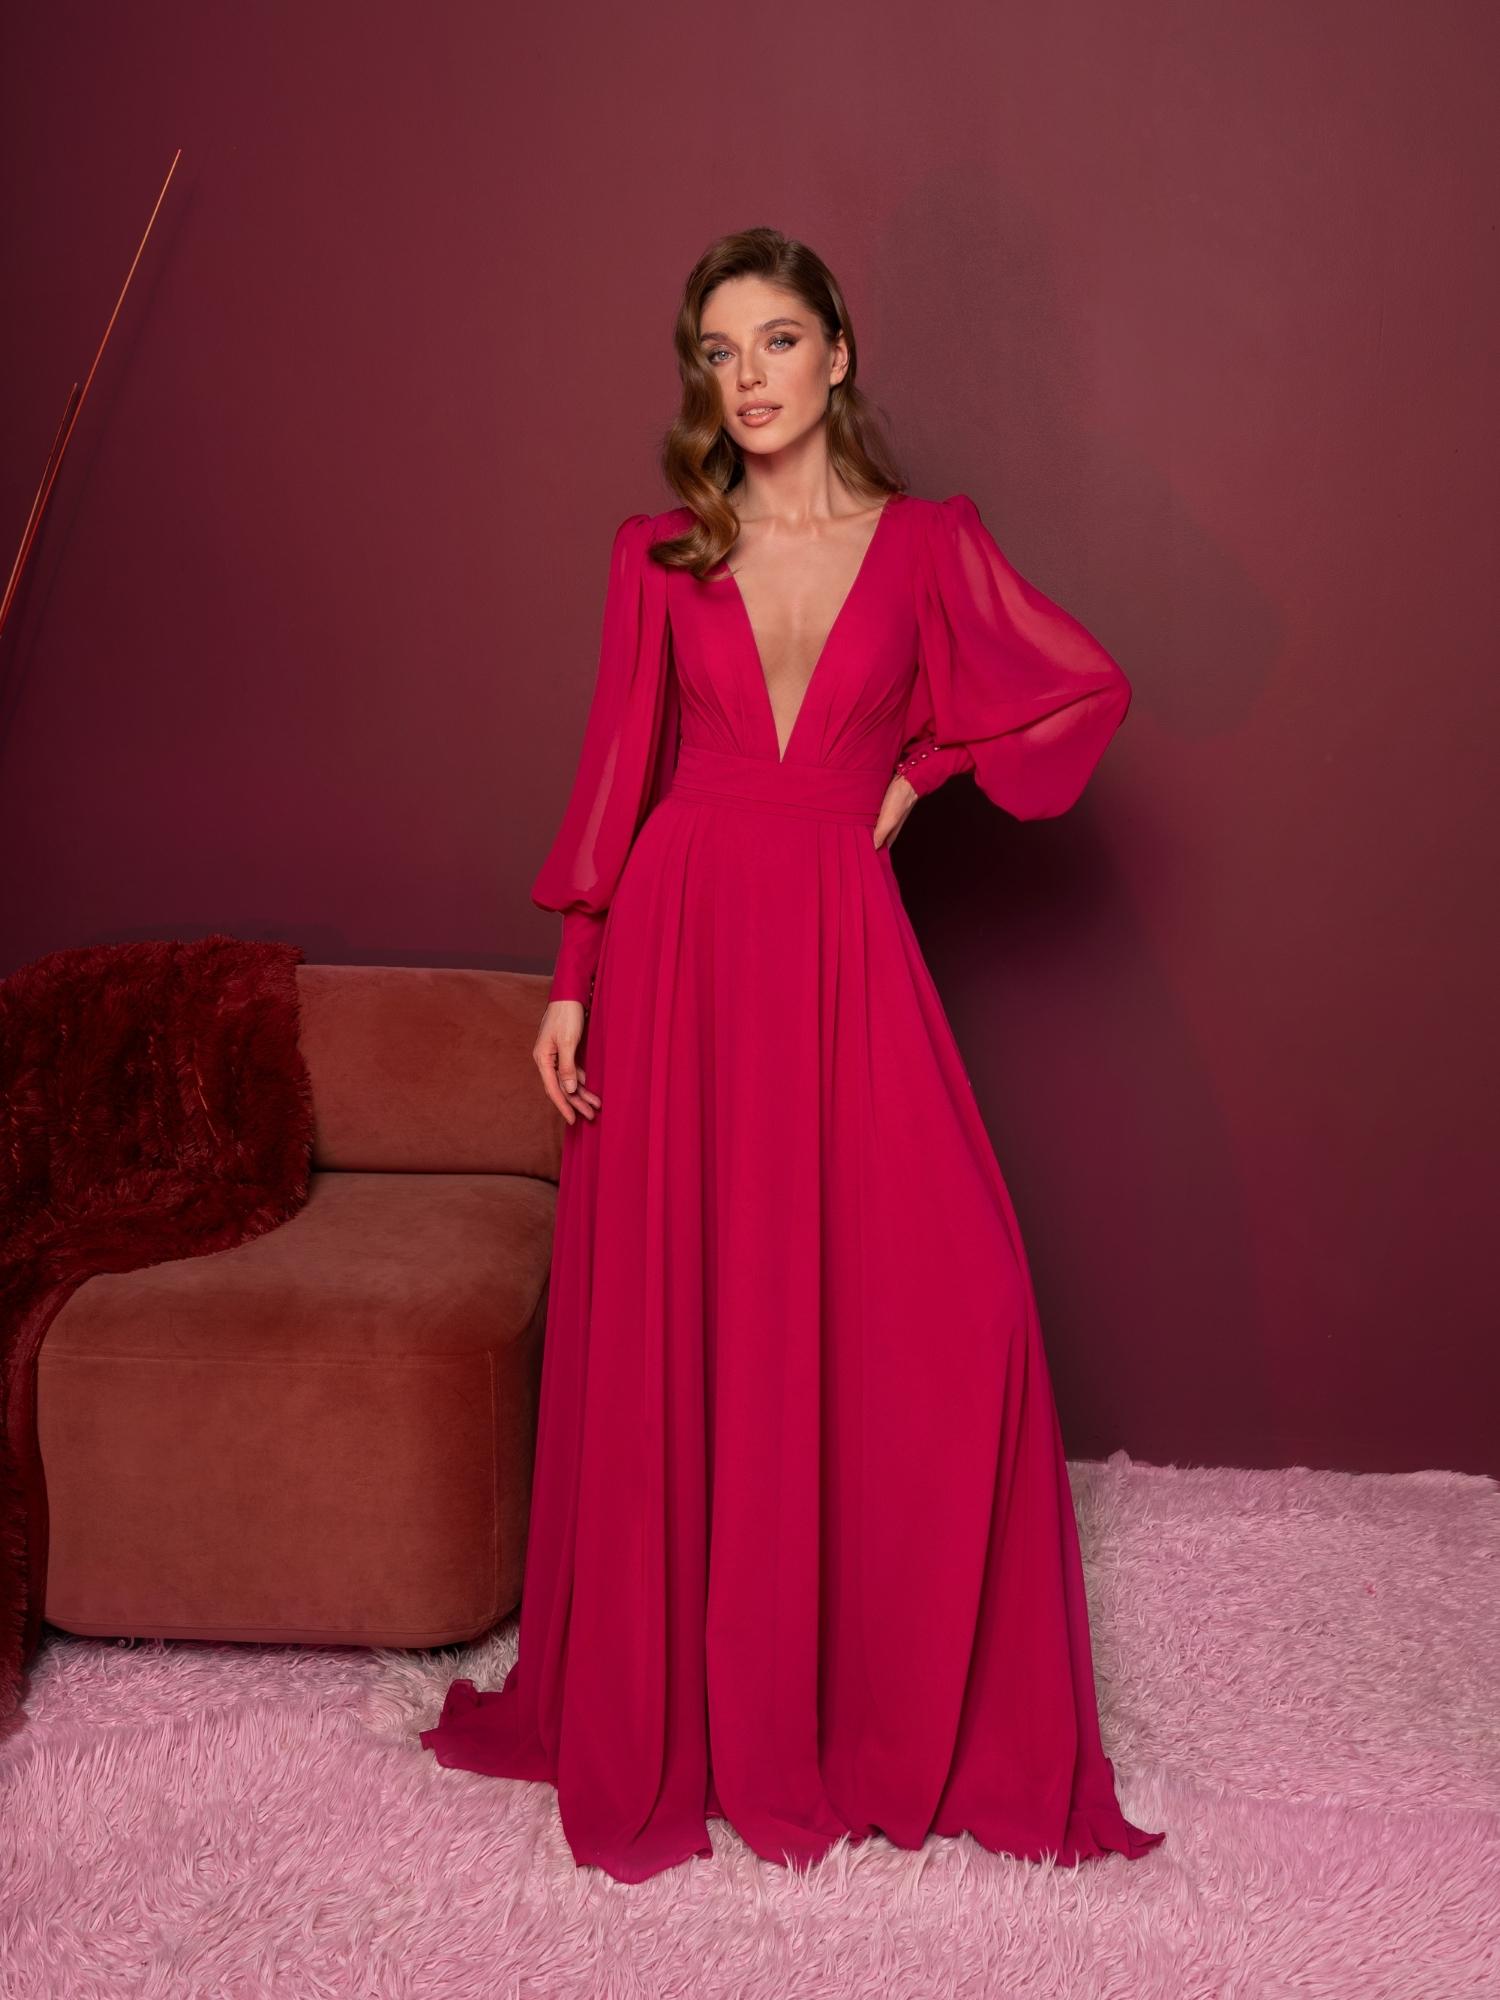 Long-sleeved dress with a plunging neckline